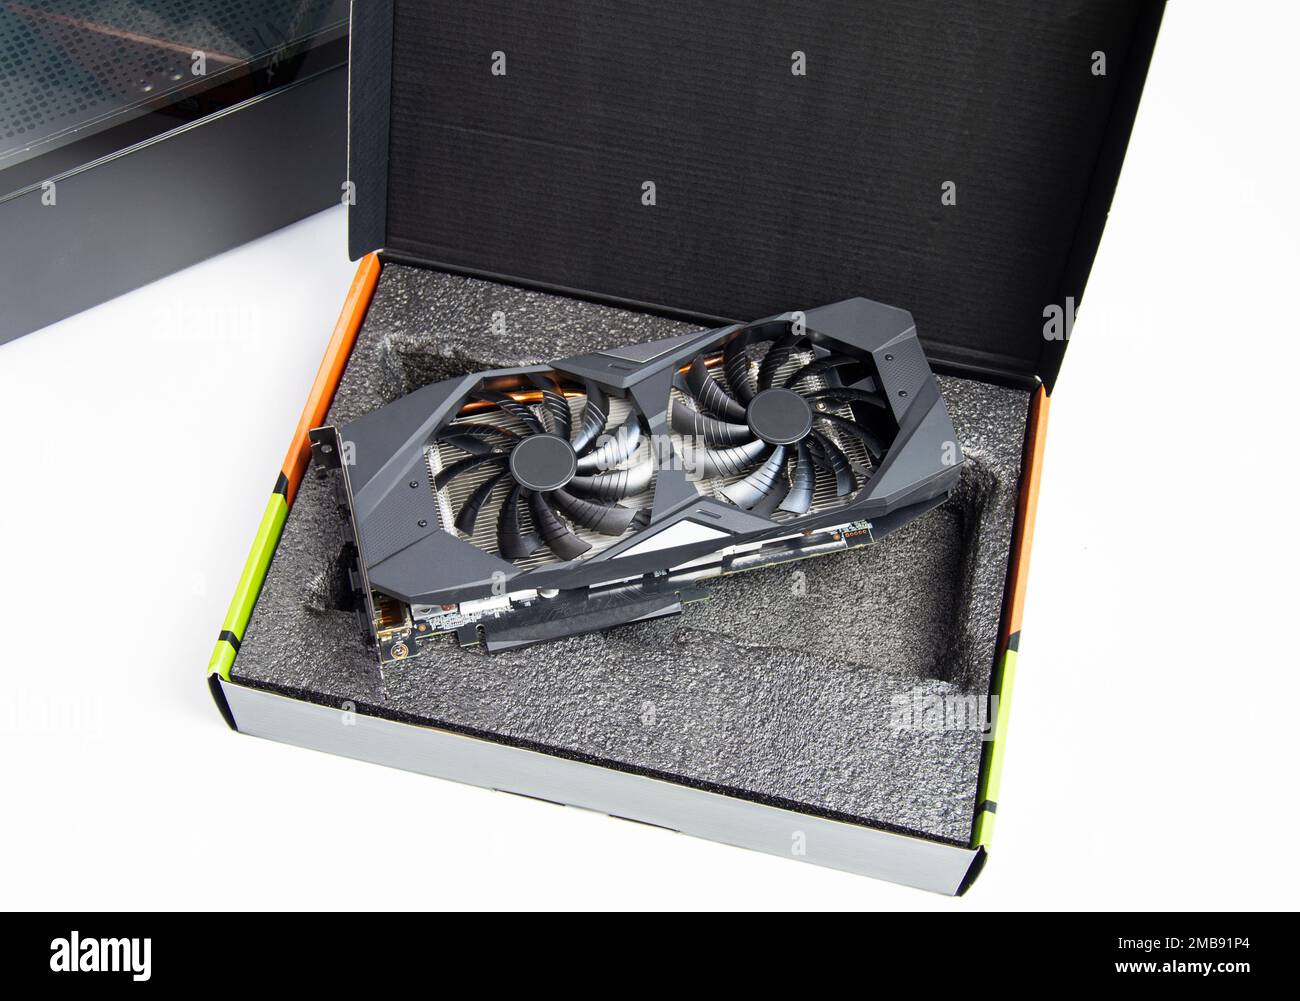 top view of computer graphics card Stock Photo